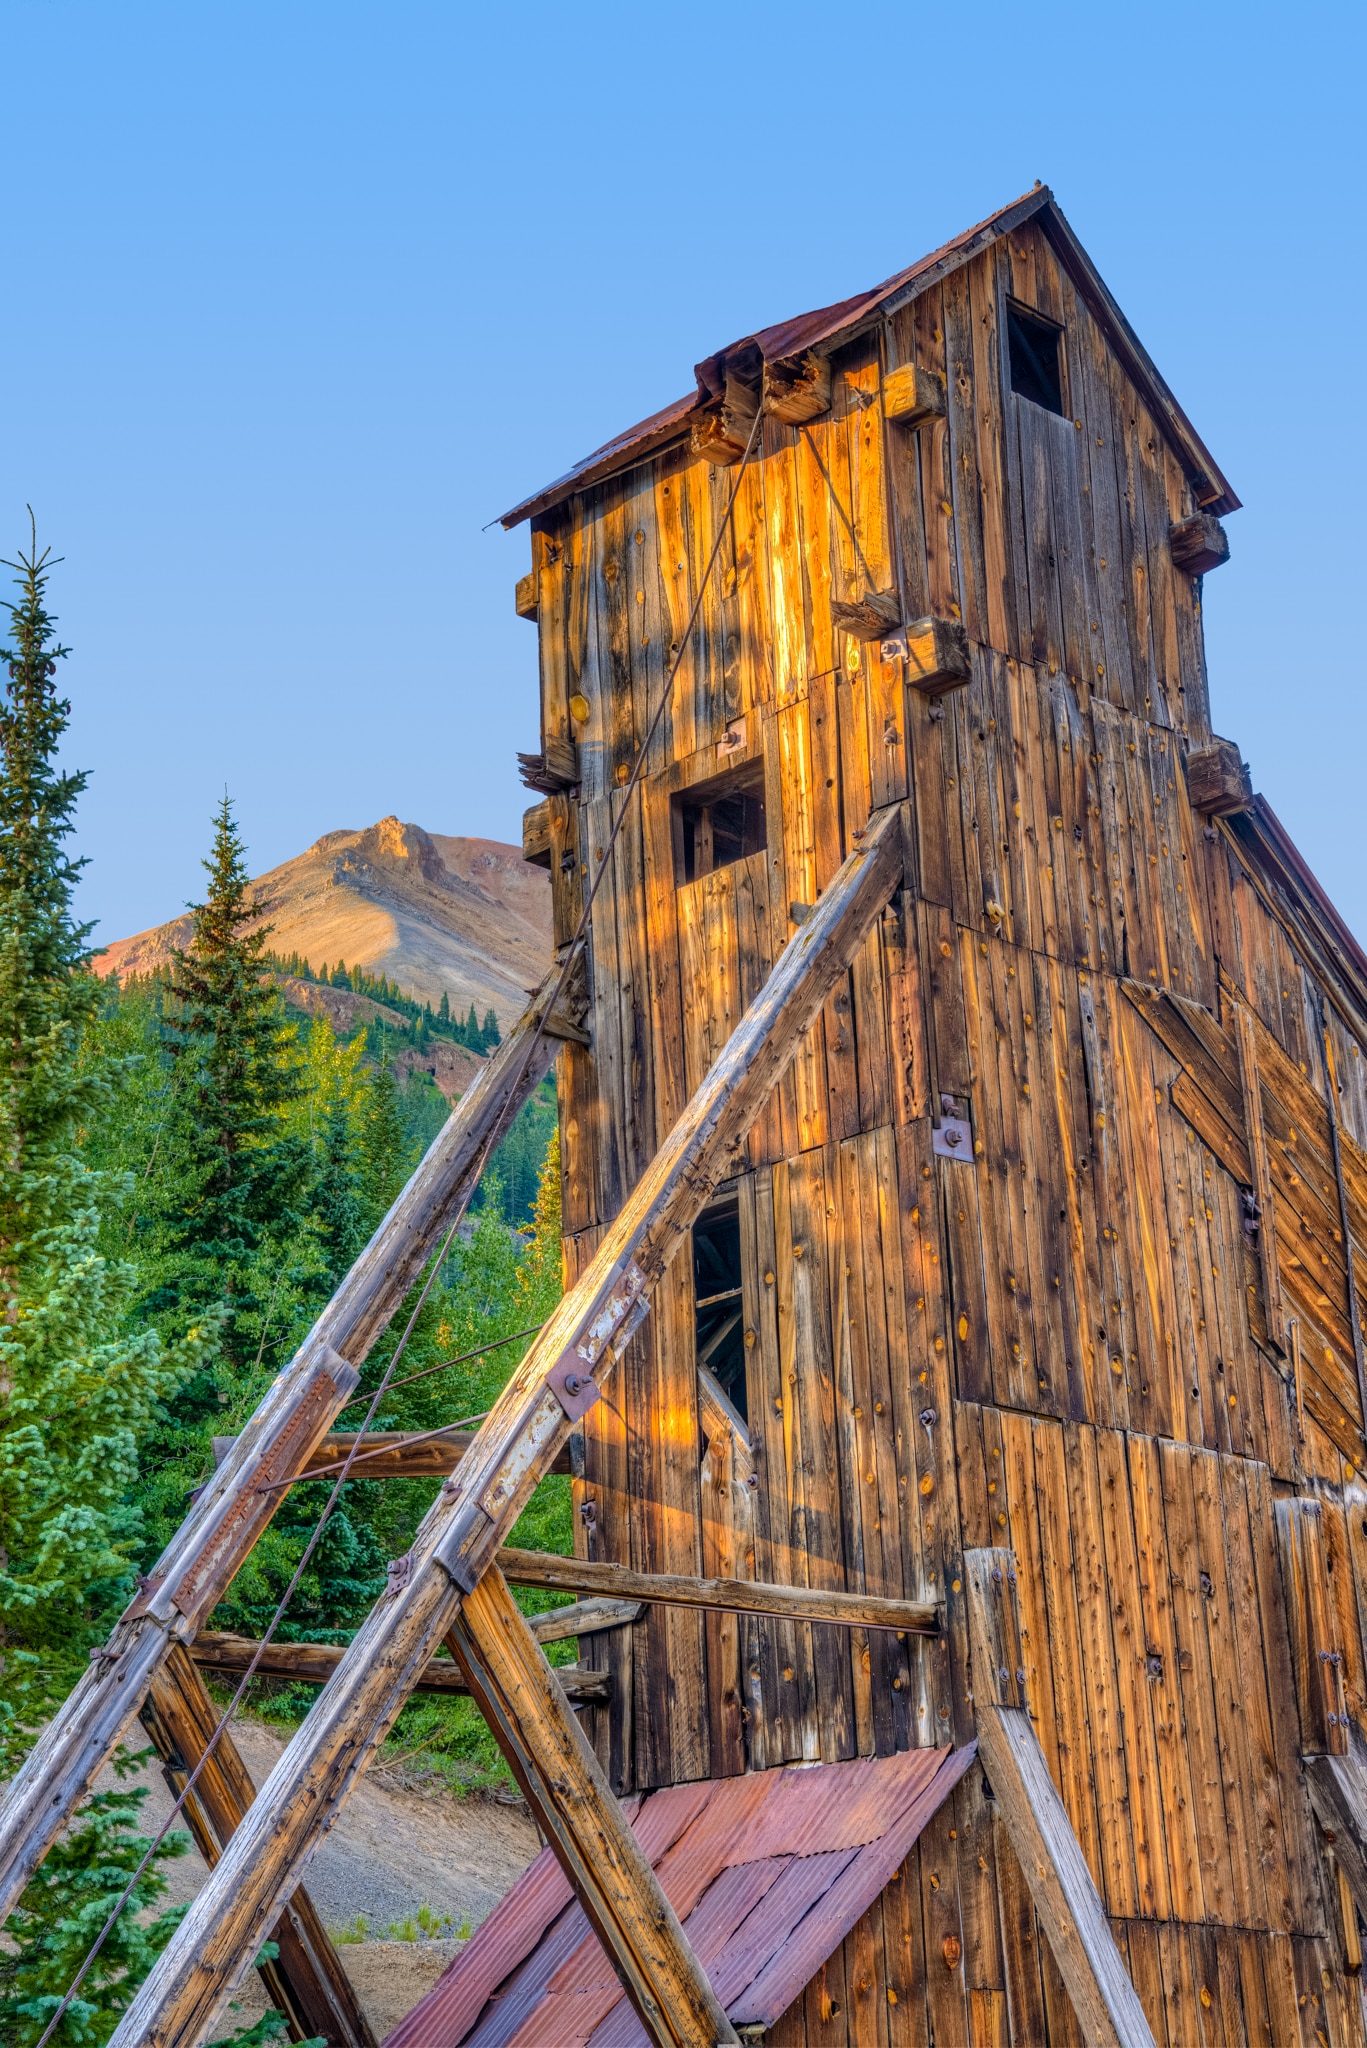 An early morning close-up view of the Yankee Girl Mine headframe viewed from Ouray County Road 31 near Ouray, Colorado.